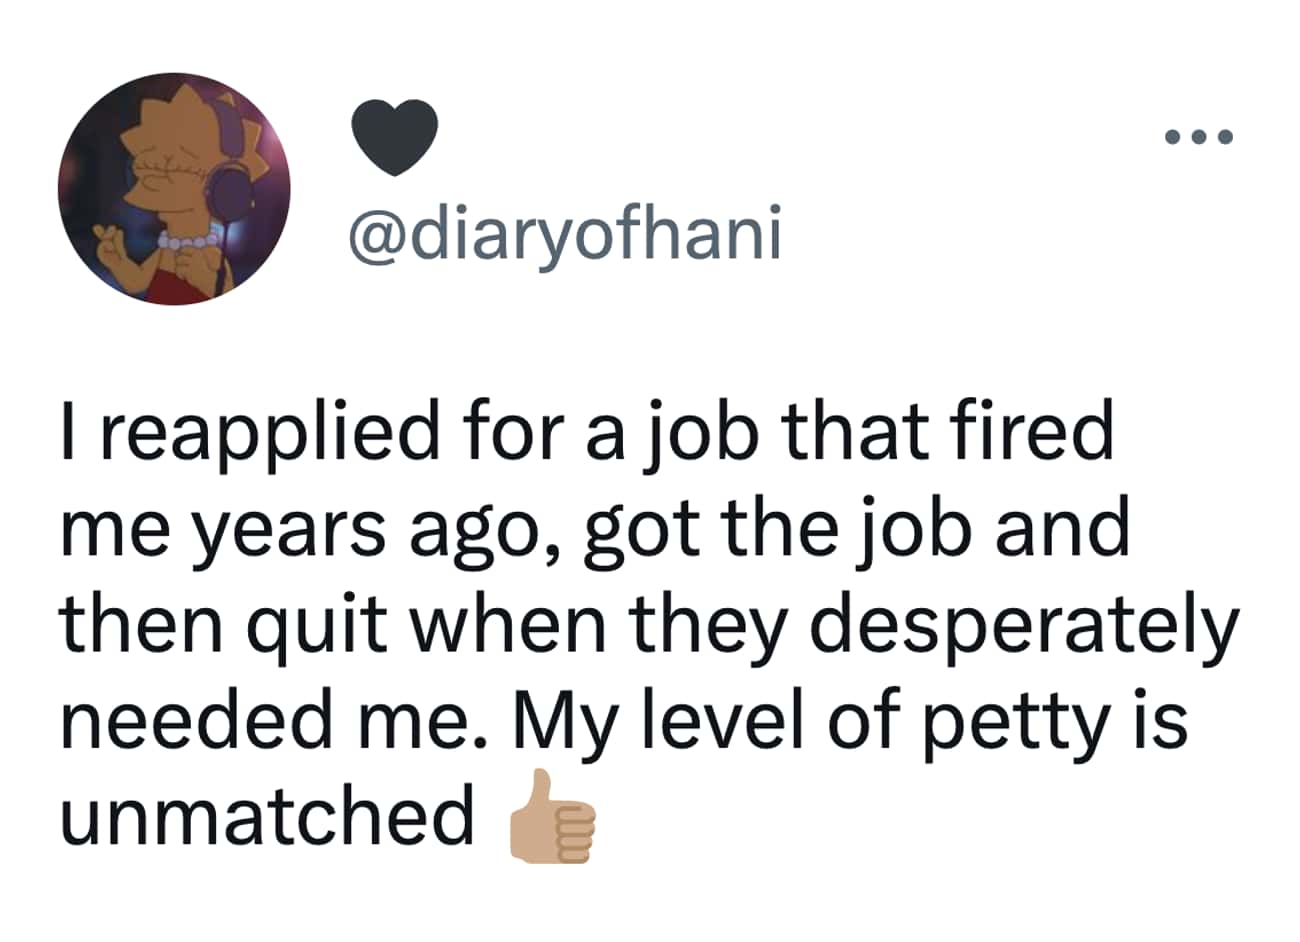 oversharing twitter - reapplied for job that fired me